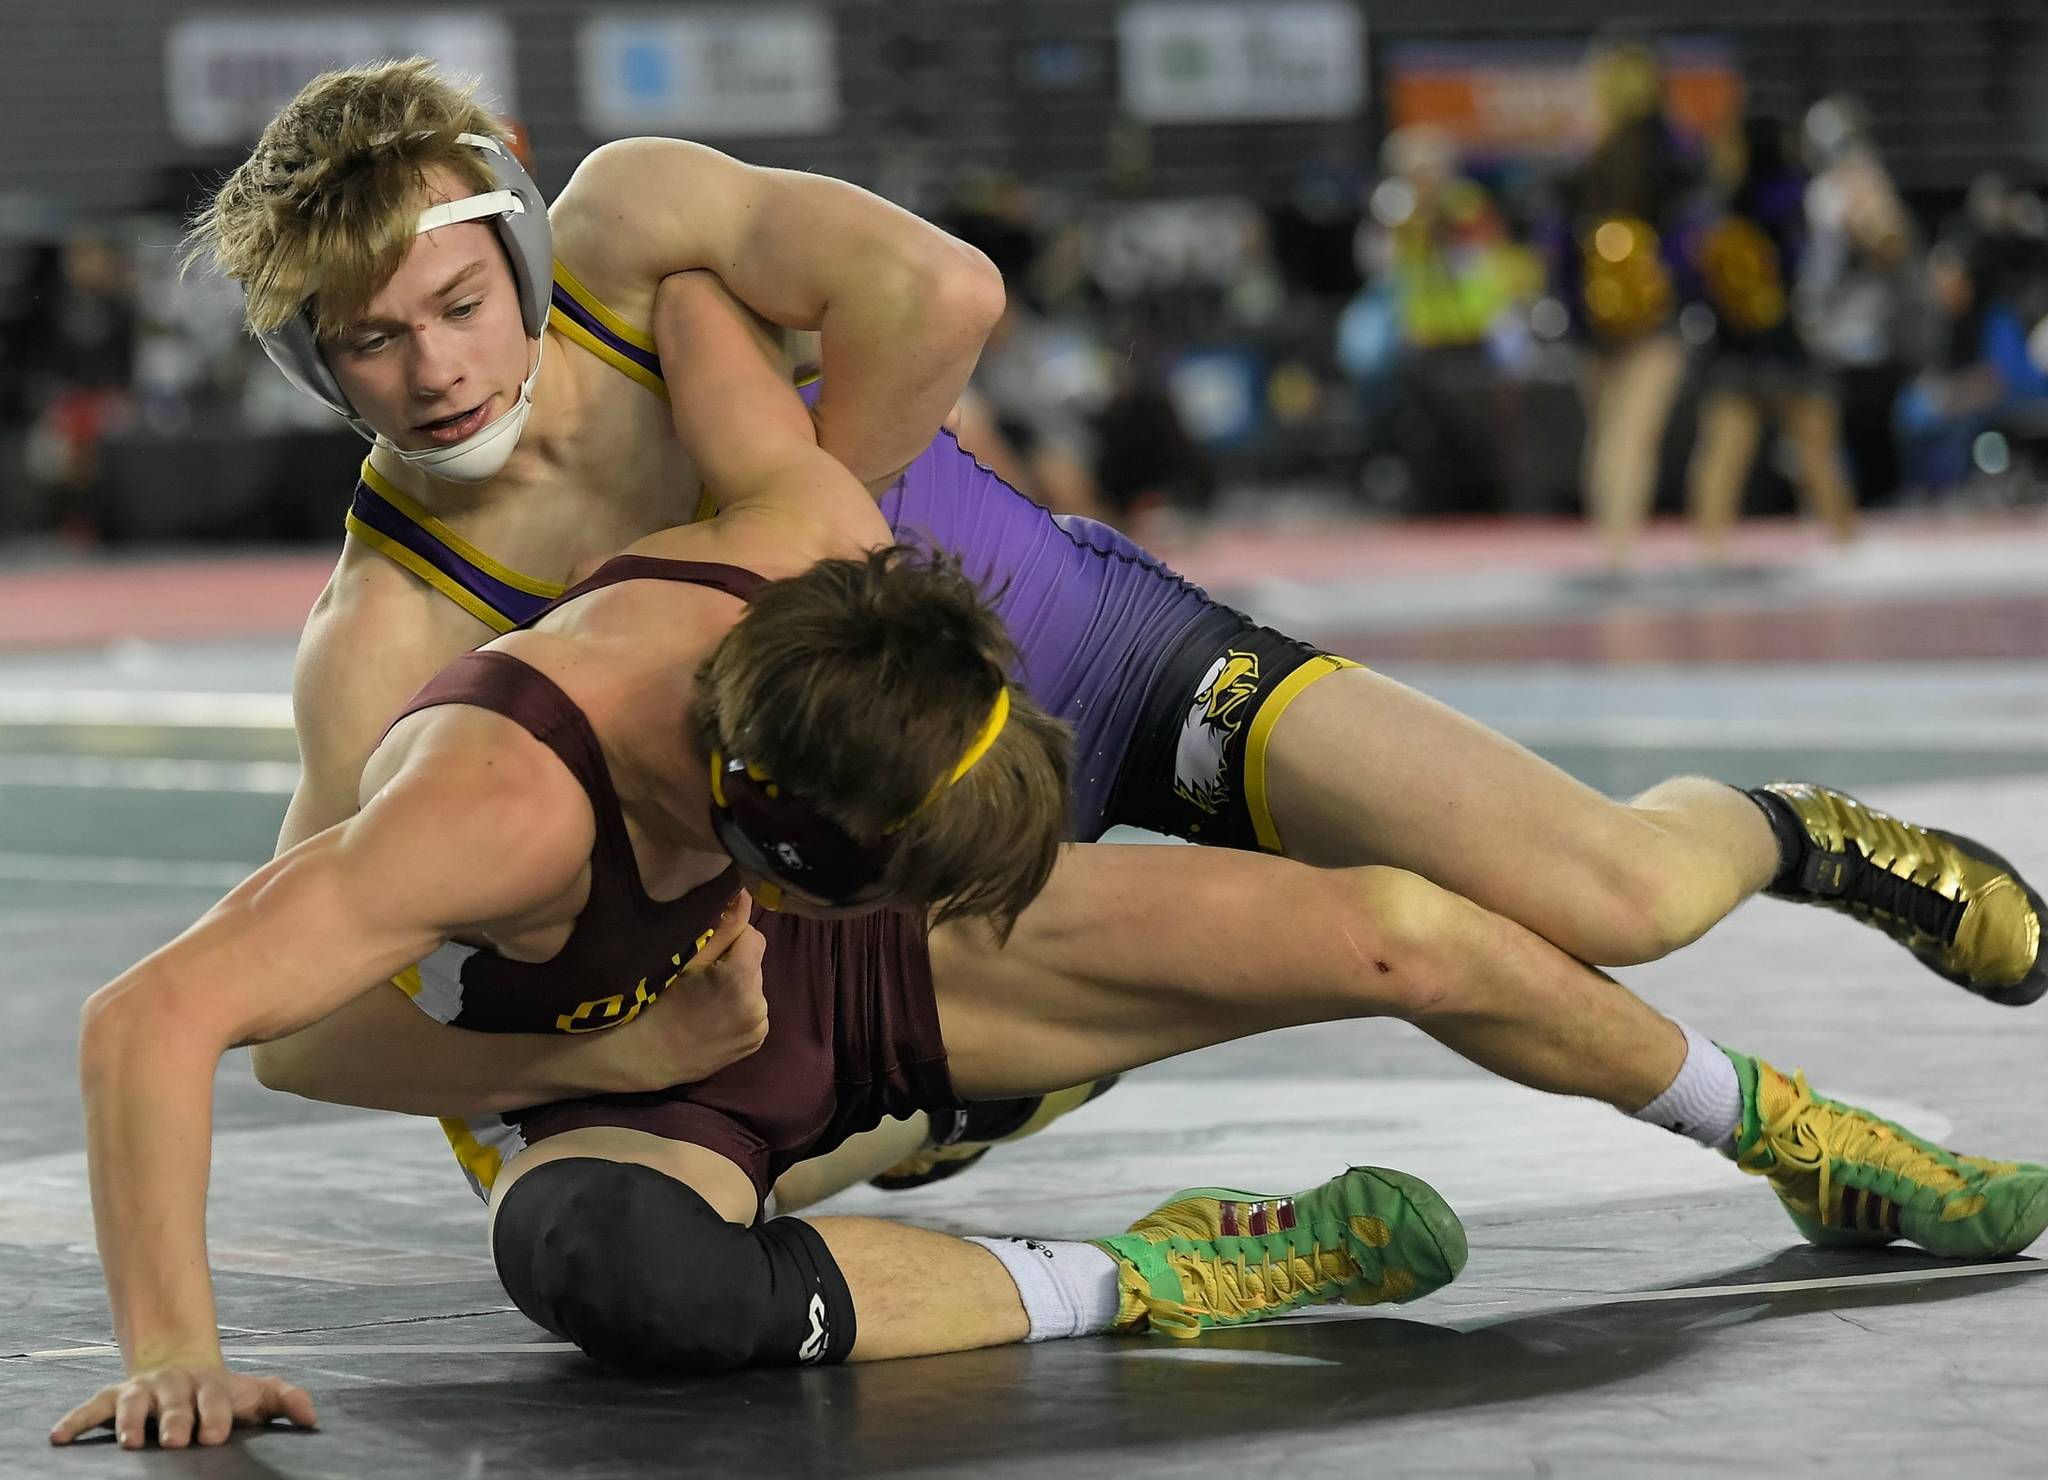 Tanner shines at Mat Classic XXXII